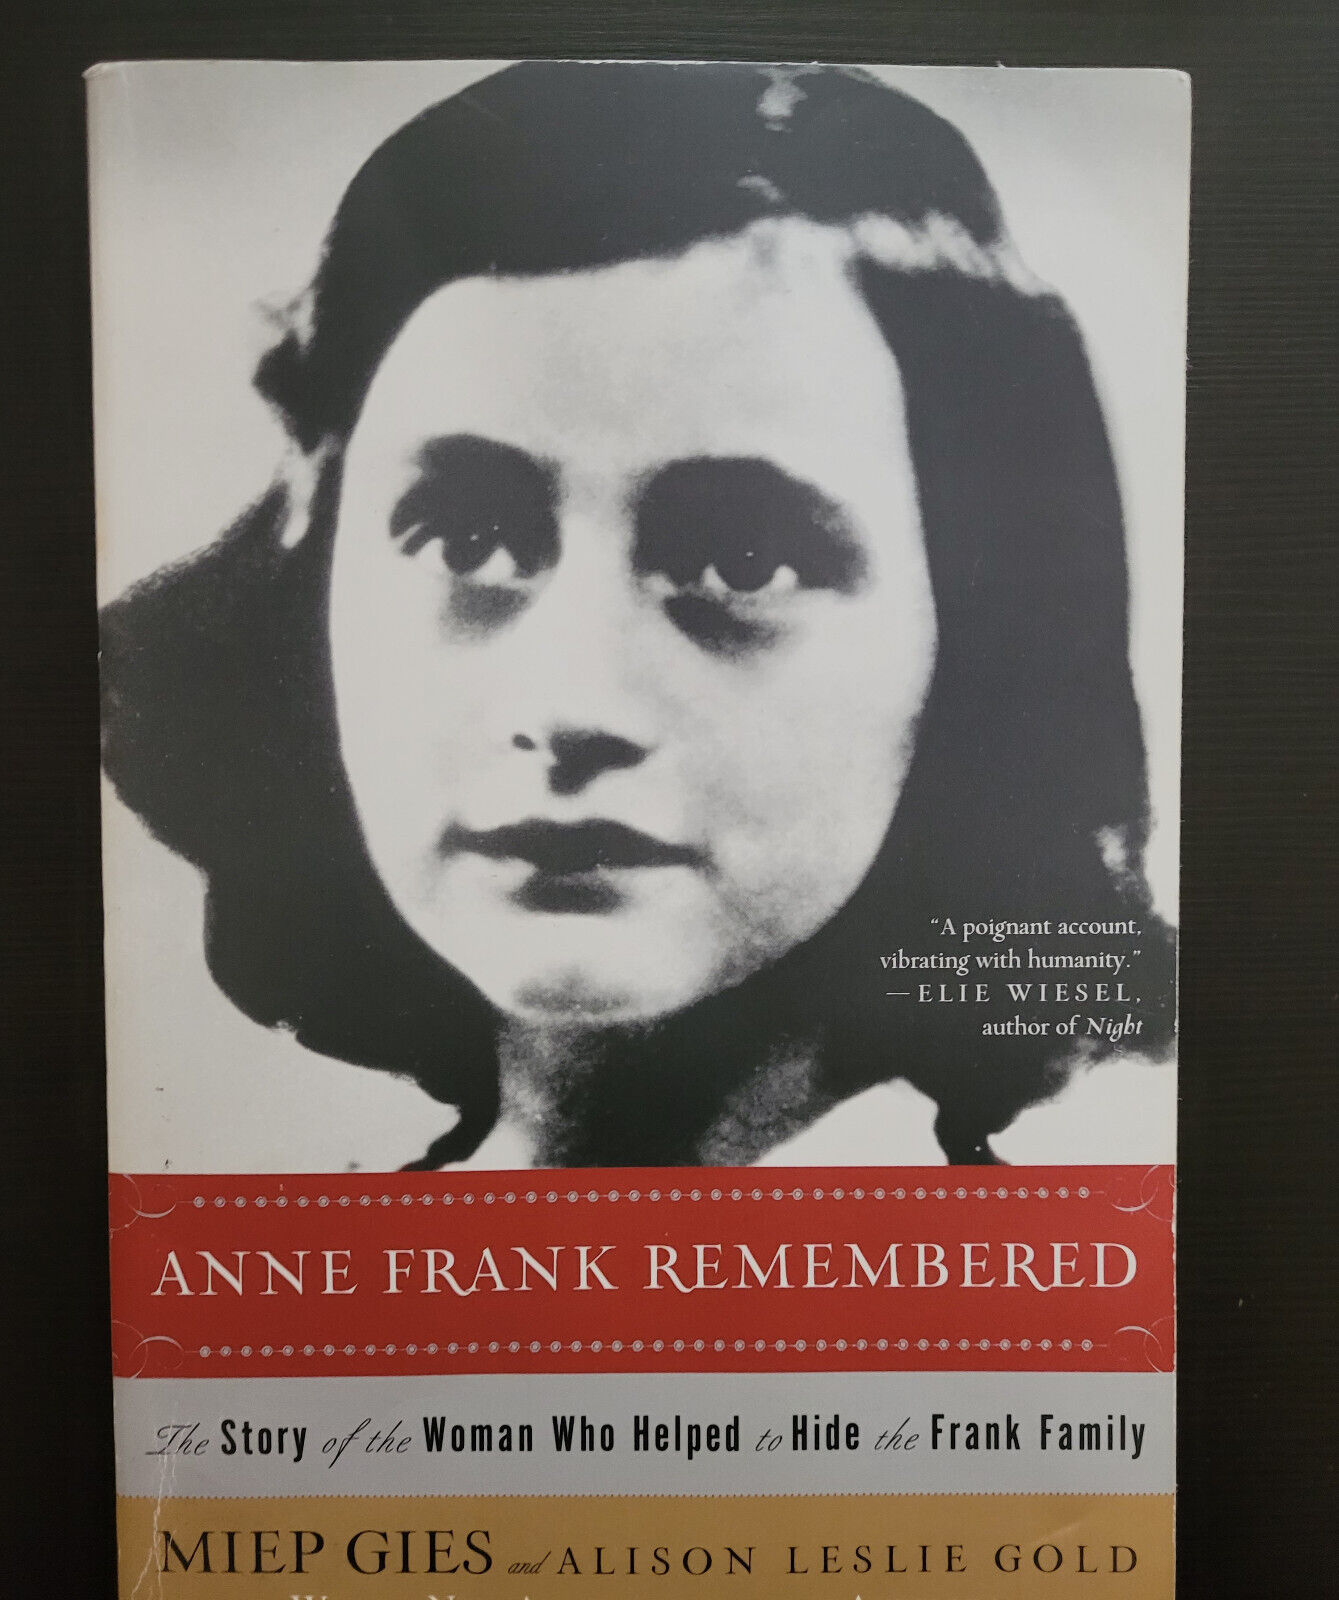 MIEP GIES SIGNED BOOK  Anne Frank Remembered SOFTBACK SCARCE AMSTERDAM